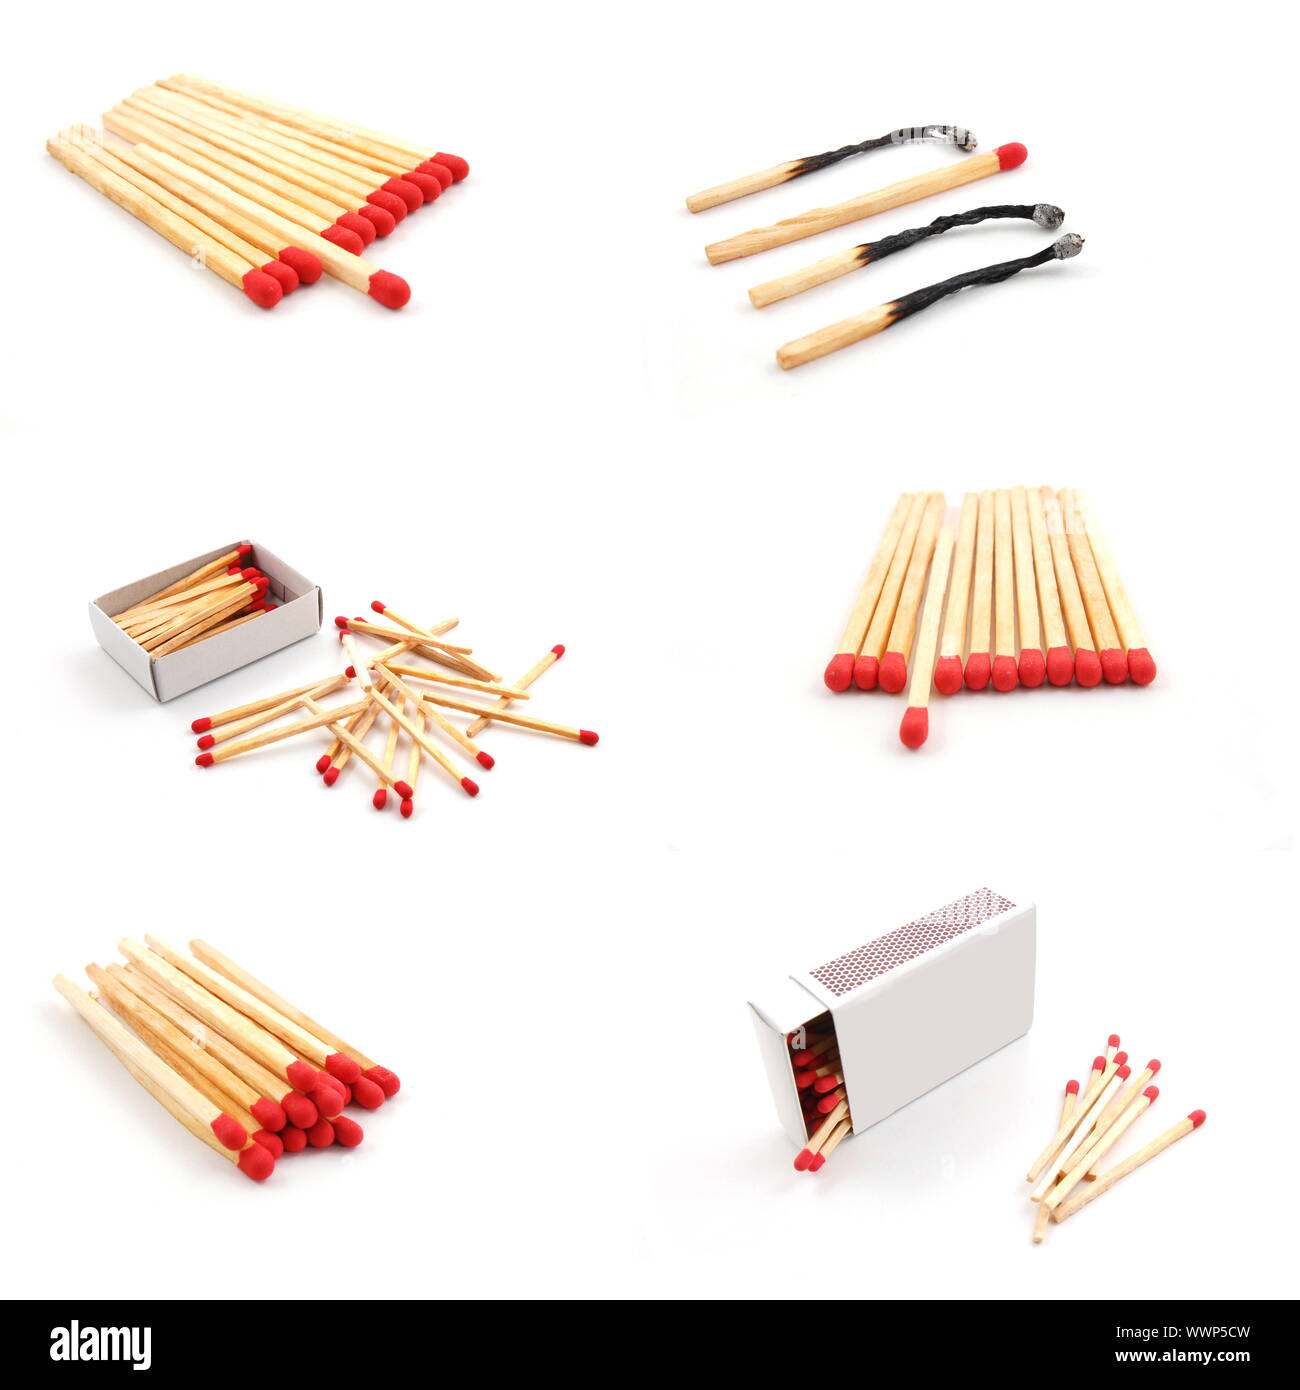 matches and matchbox collection isolated on white background Stock Photo